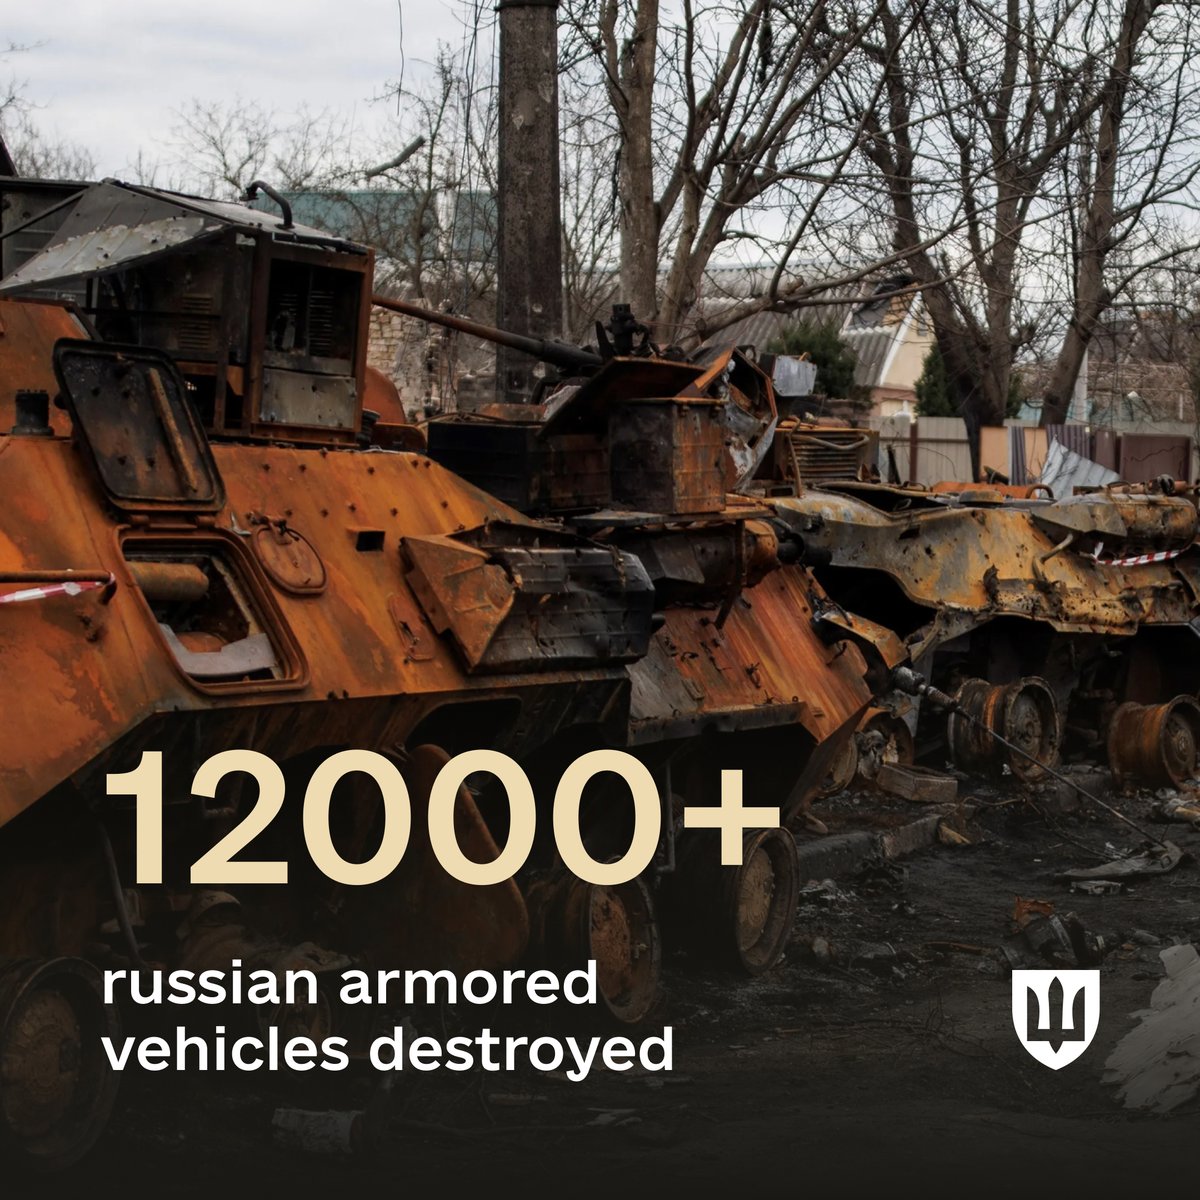 Number of the day! 12,000 russian armored vehicles have been destroyed since February 24, 2022. On average, 500 vehicles per month. russian weapons deserve to be scrap metal in Ukraine.